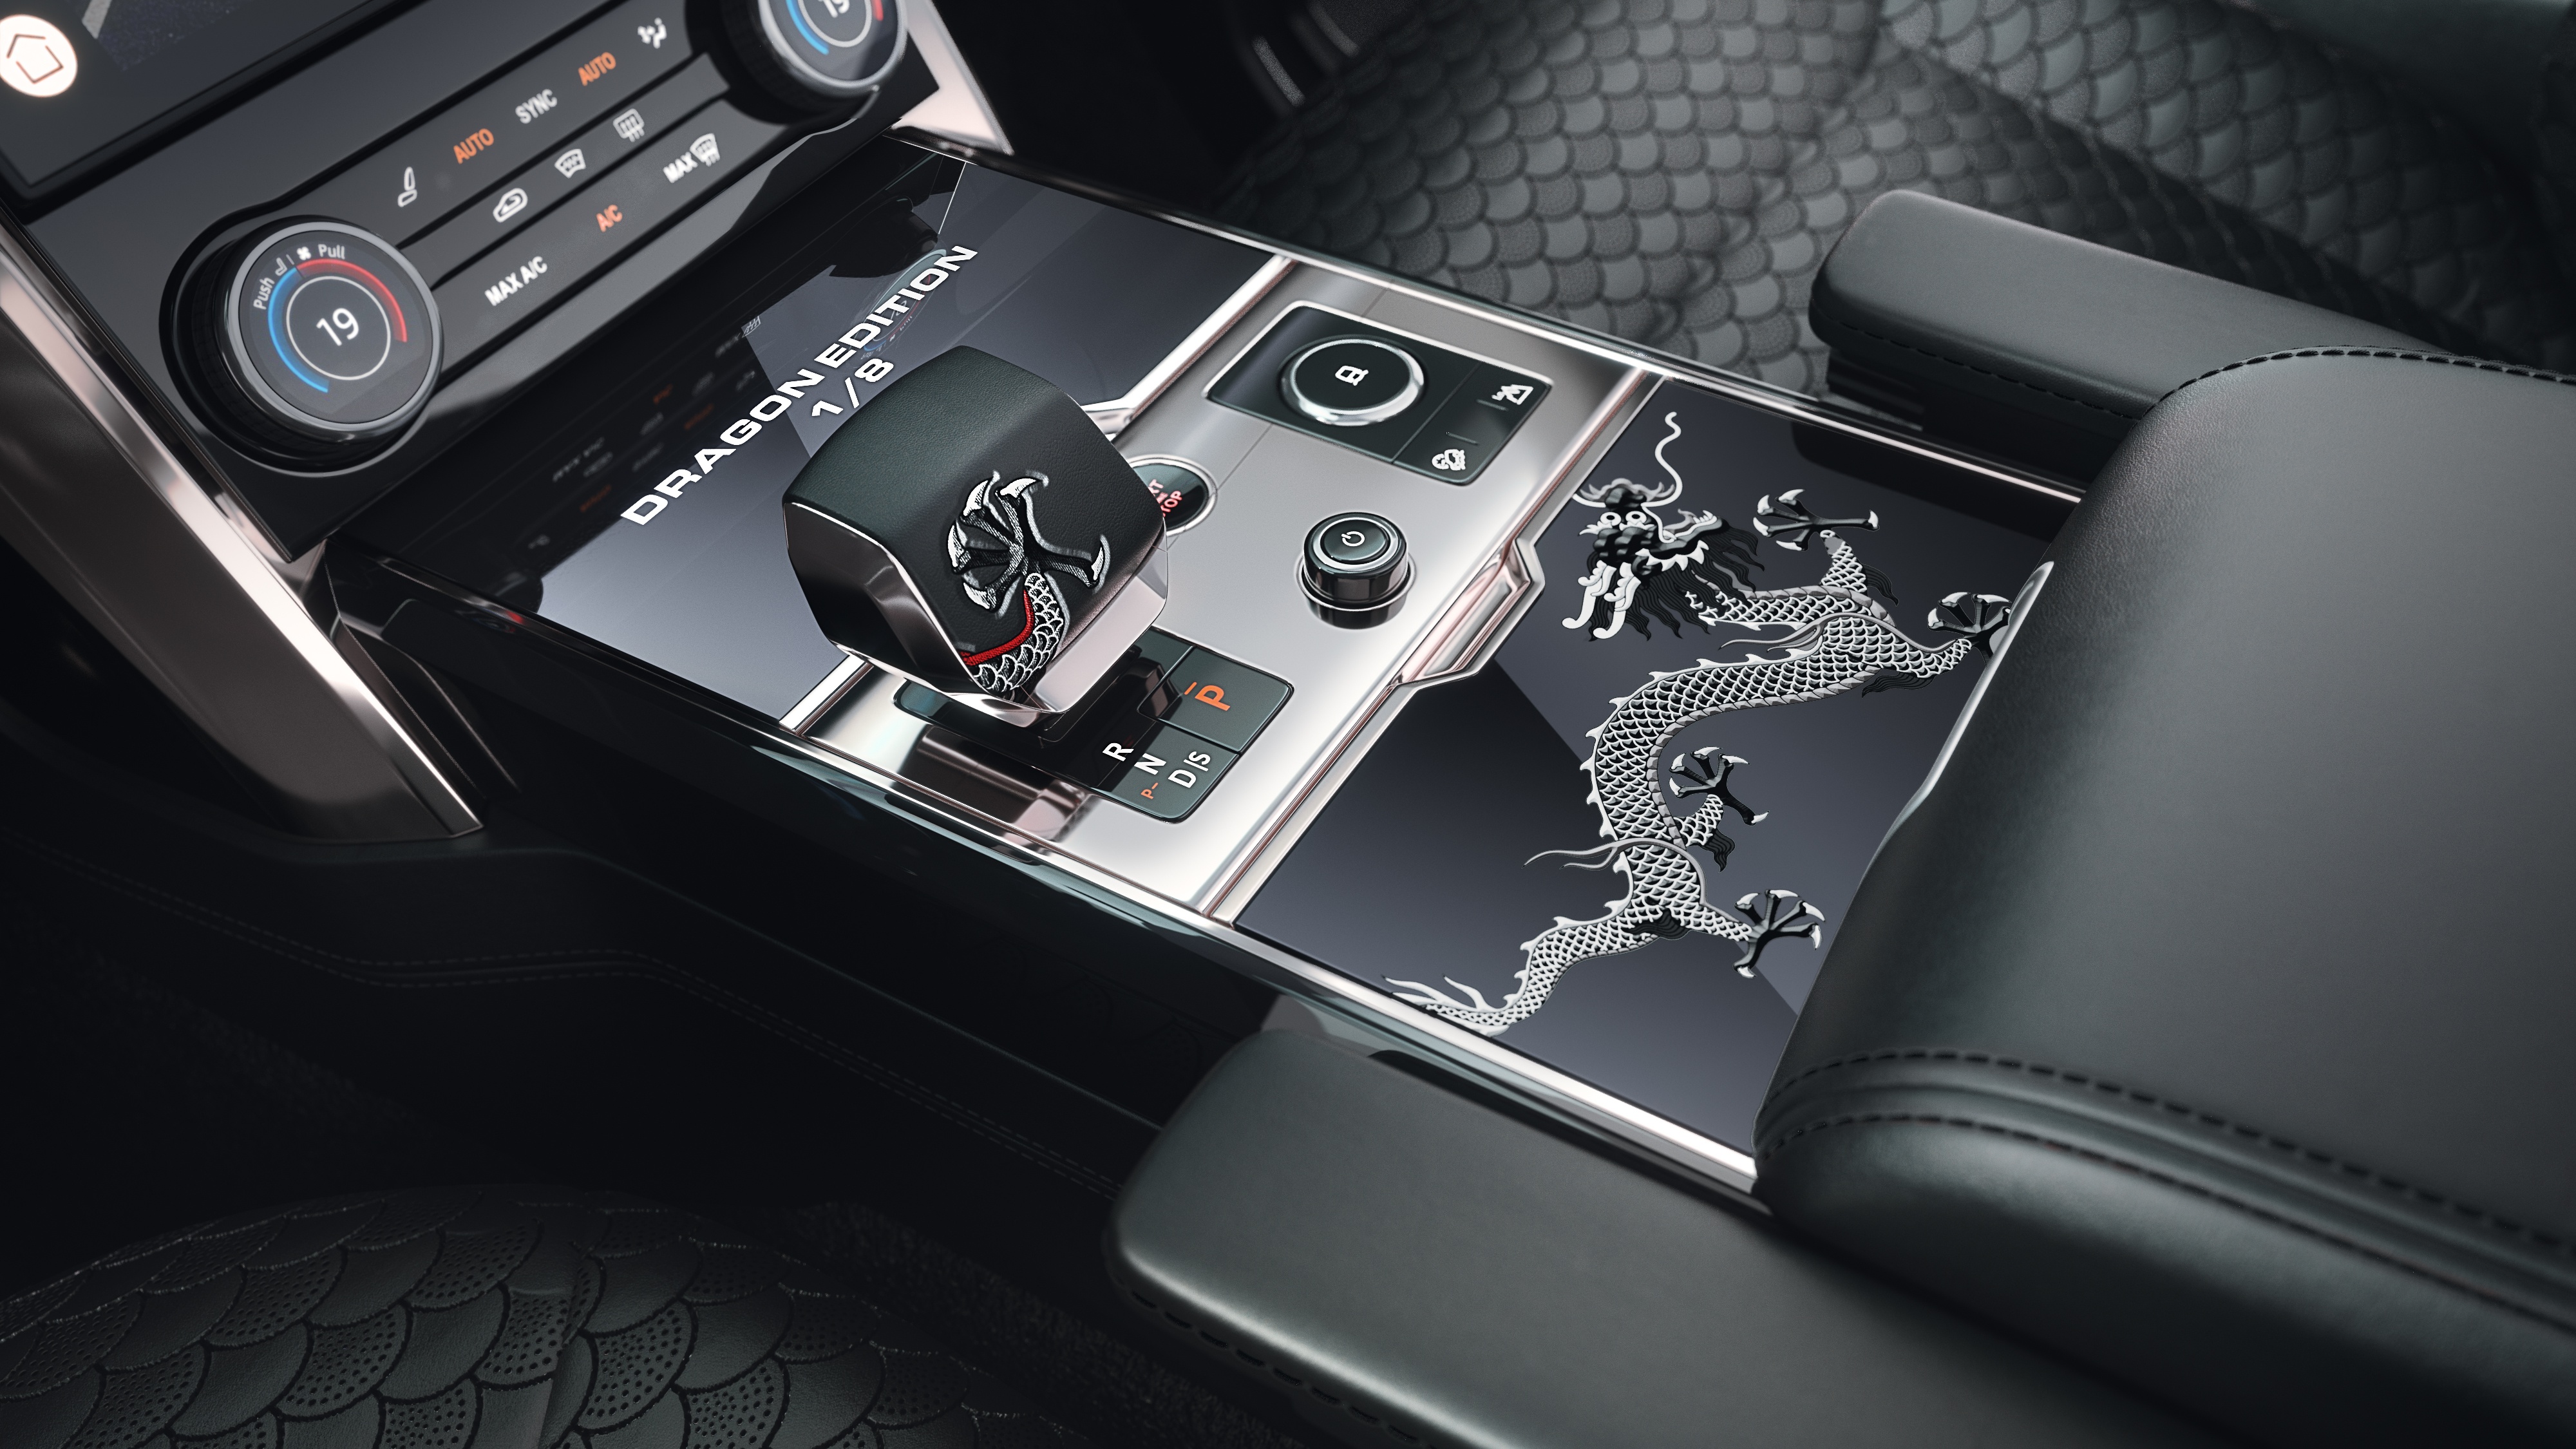 Interior details of the Dragon Edition Range Rover. Photo: Overfinch